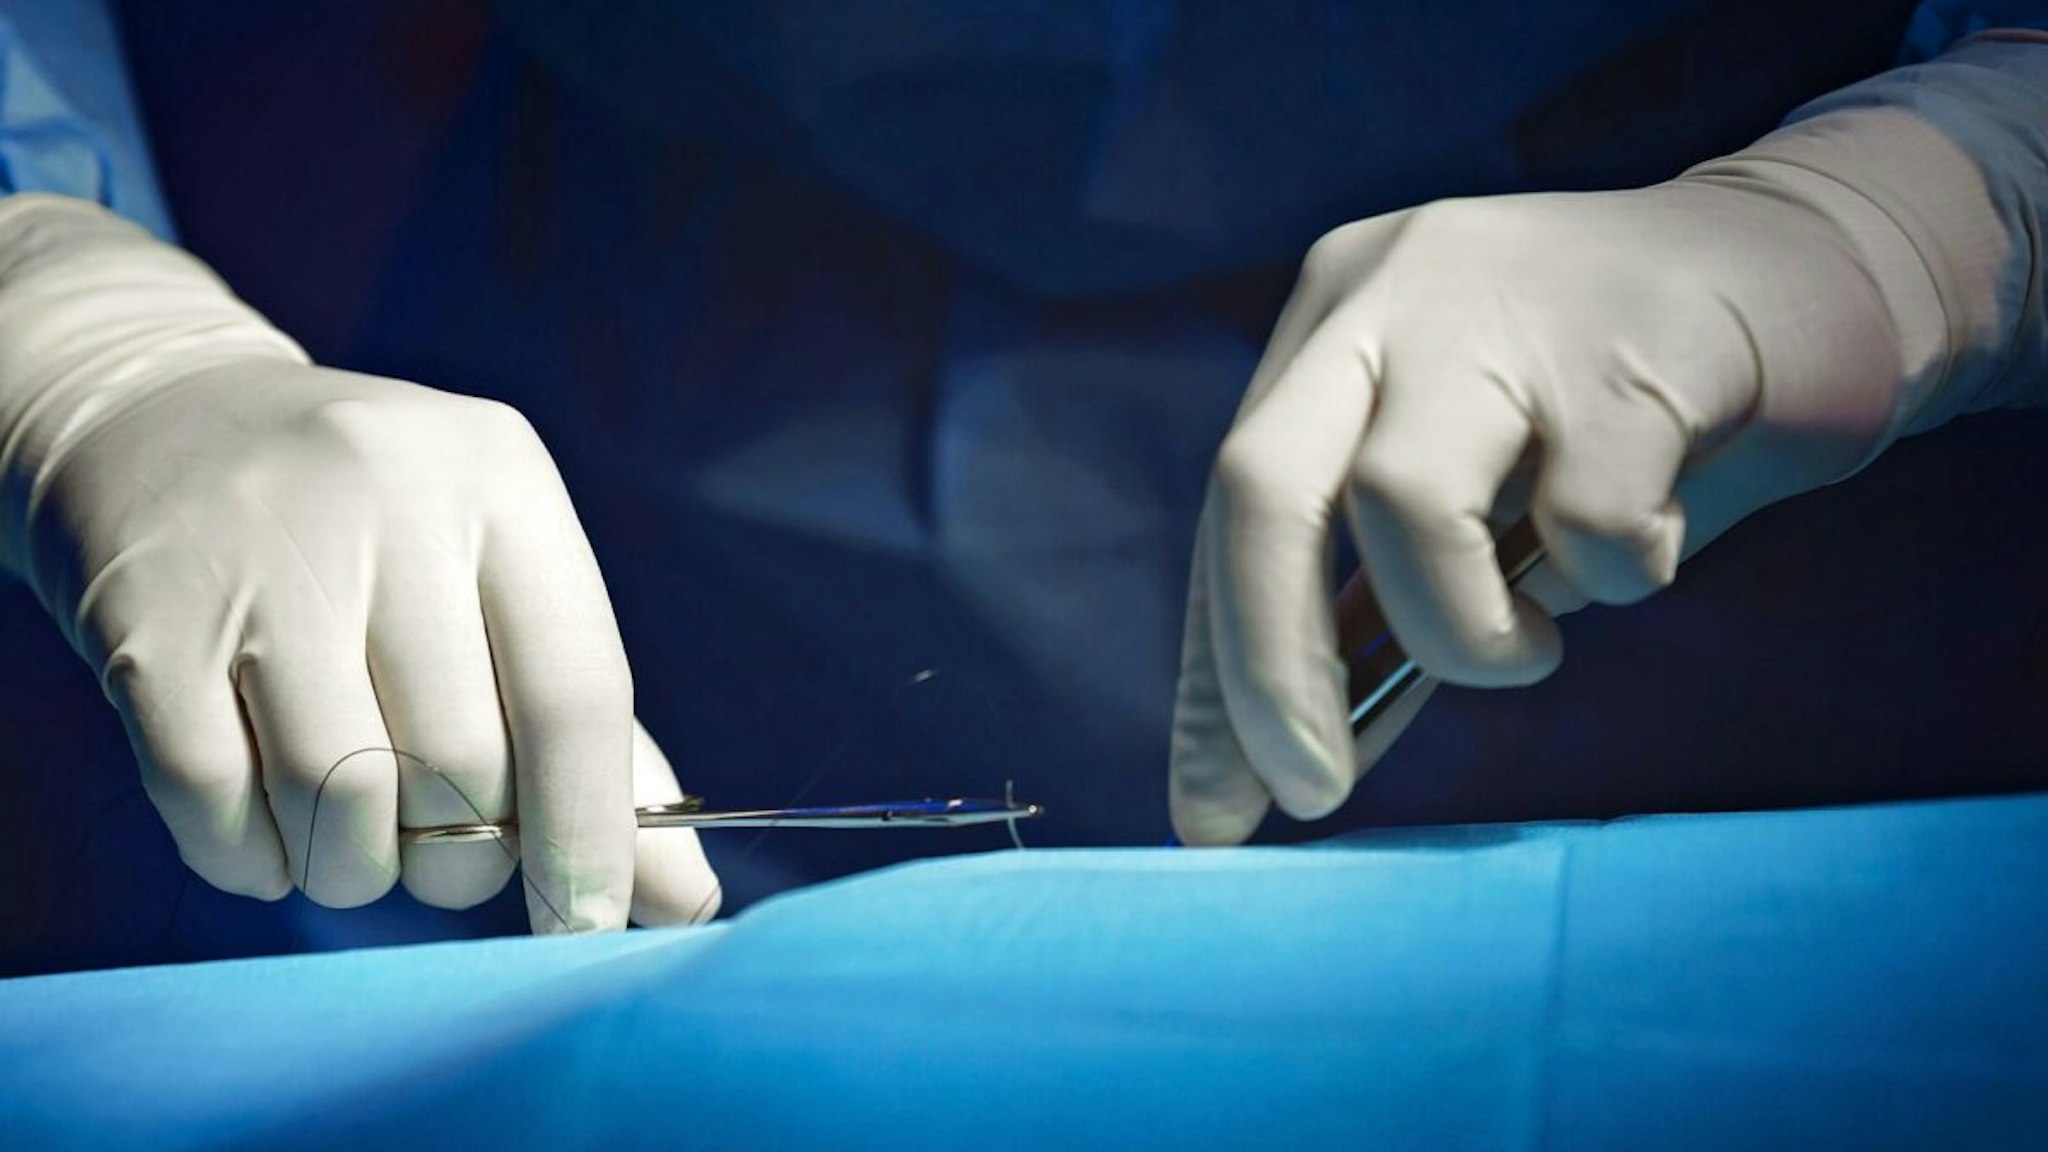 Detail of the surgeon's hands during the operation.